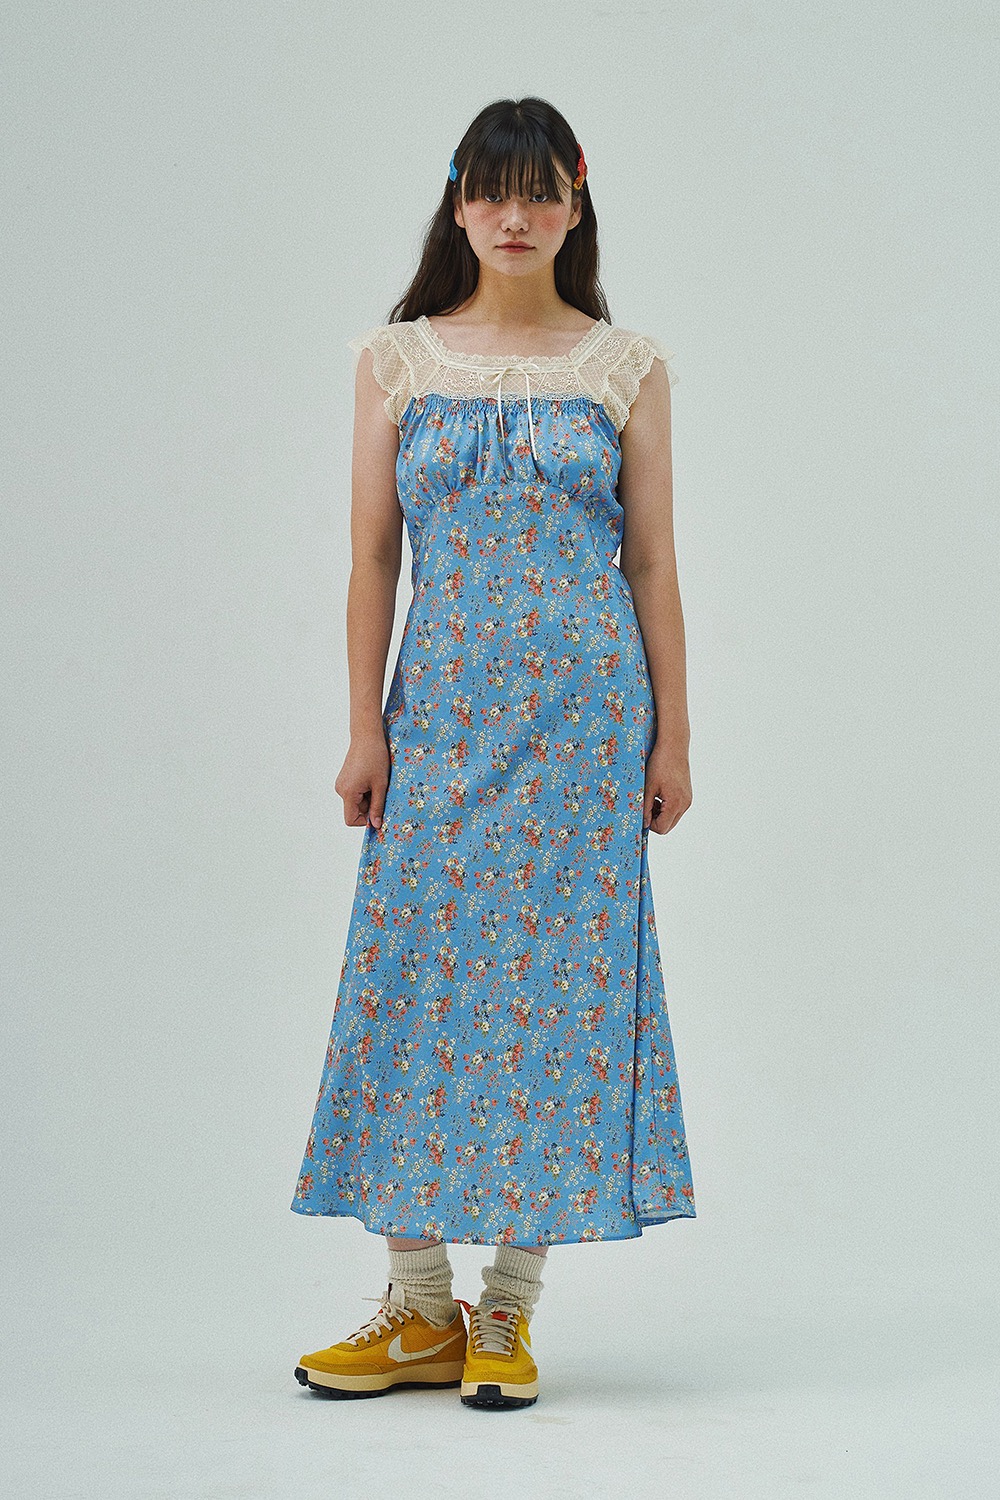 Isabella dress(french blue)